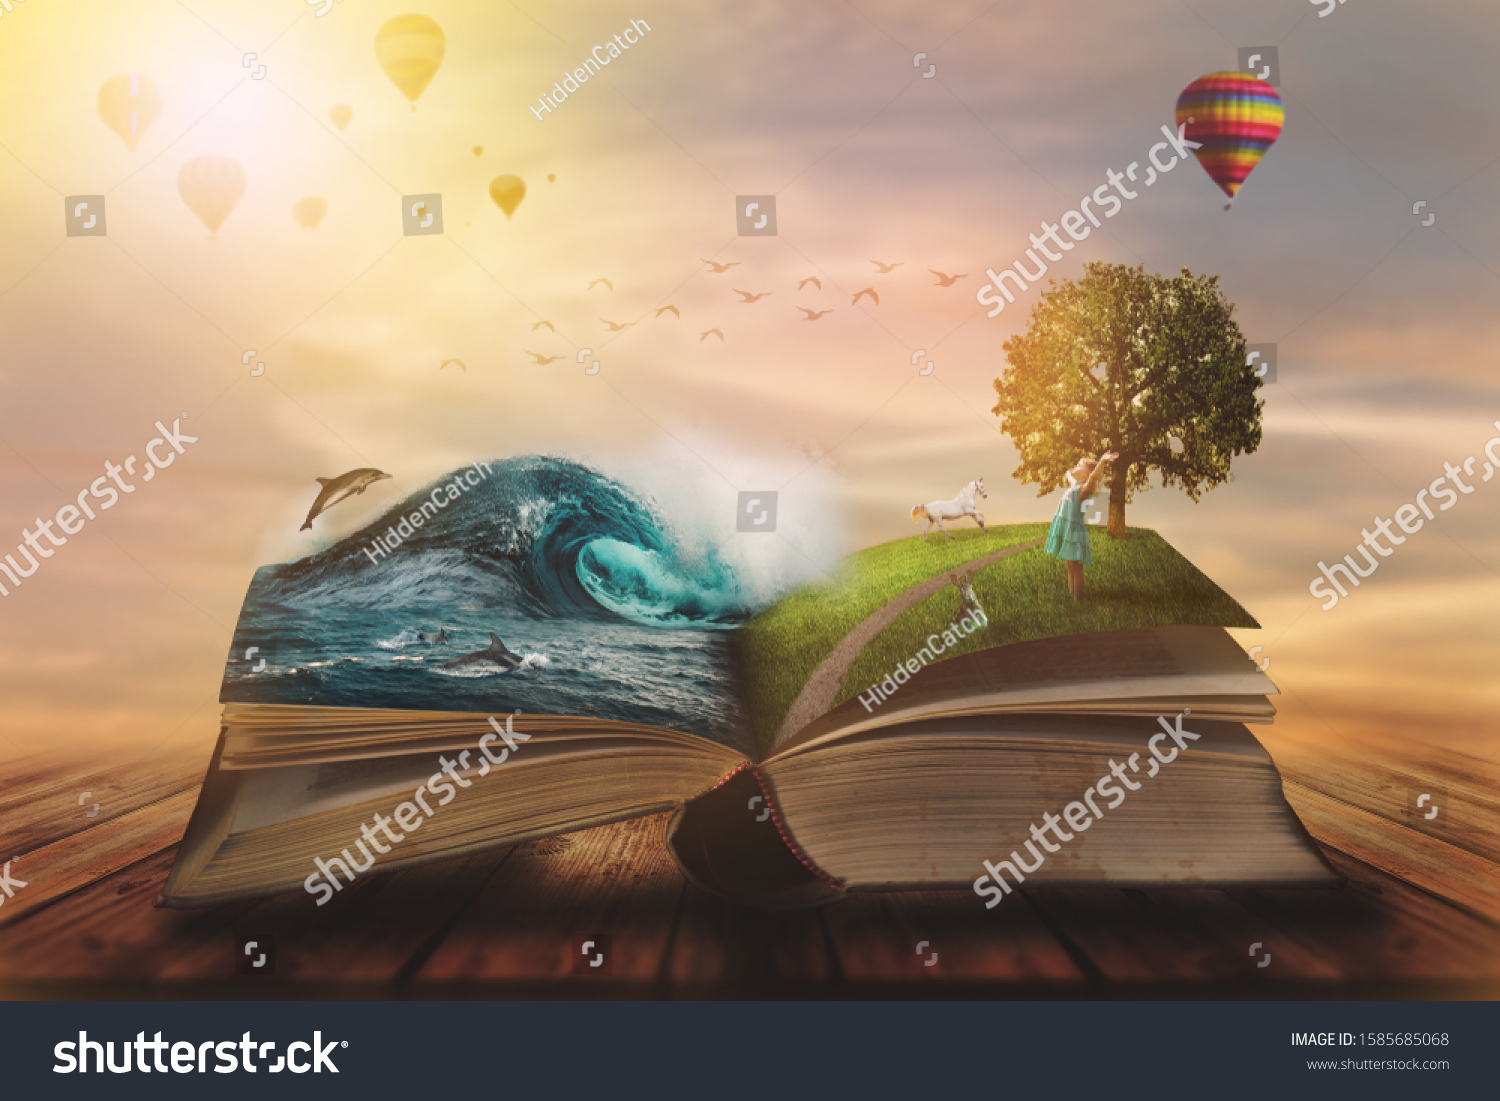 
Concept of an open magic book; open pages with water and land and small child. Fantasy, nature or learning concept, with copy space #1585685068